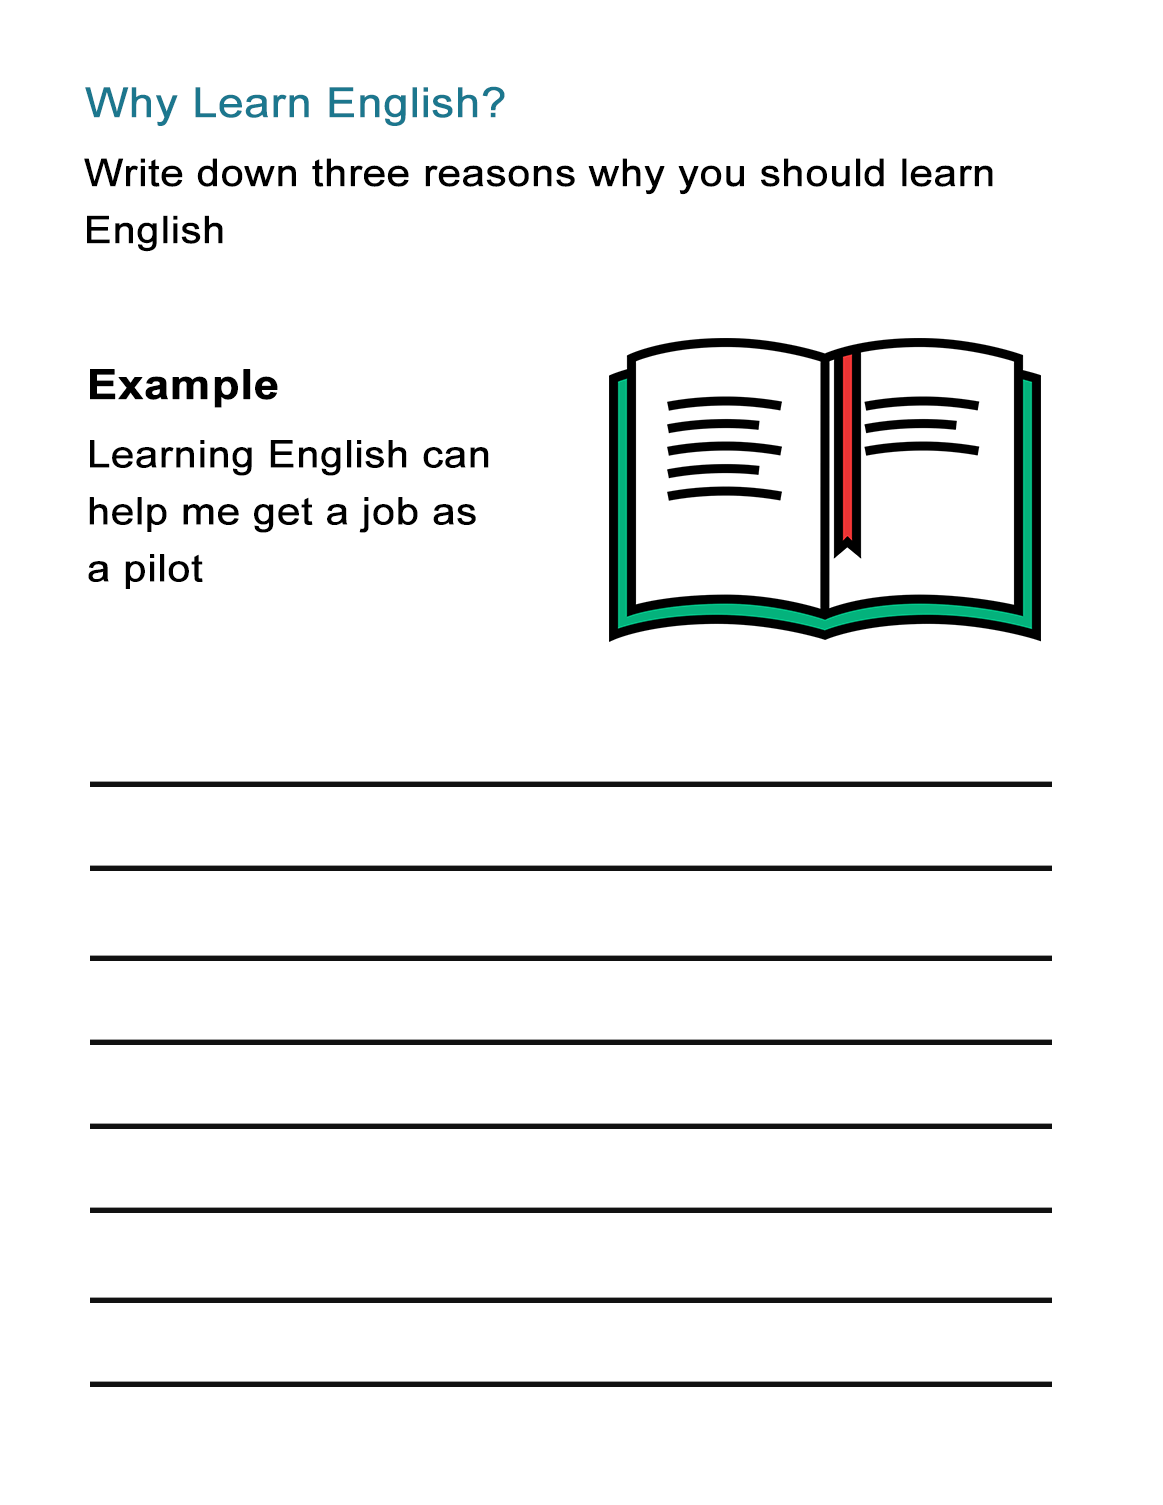 homework for learning english